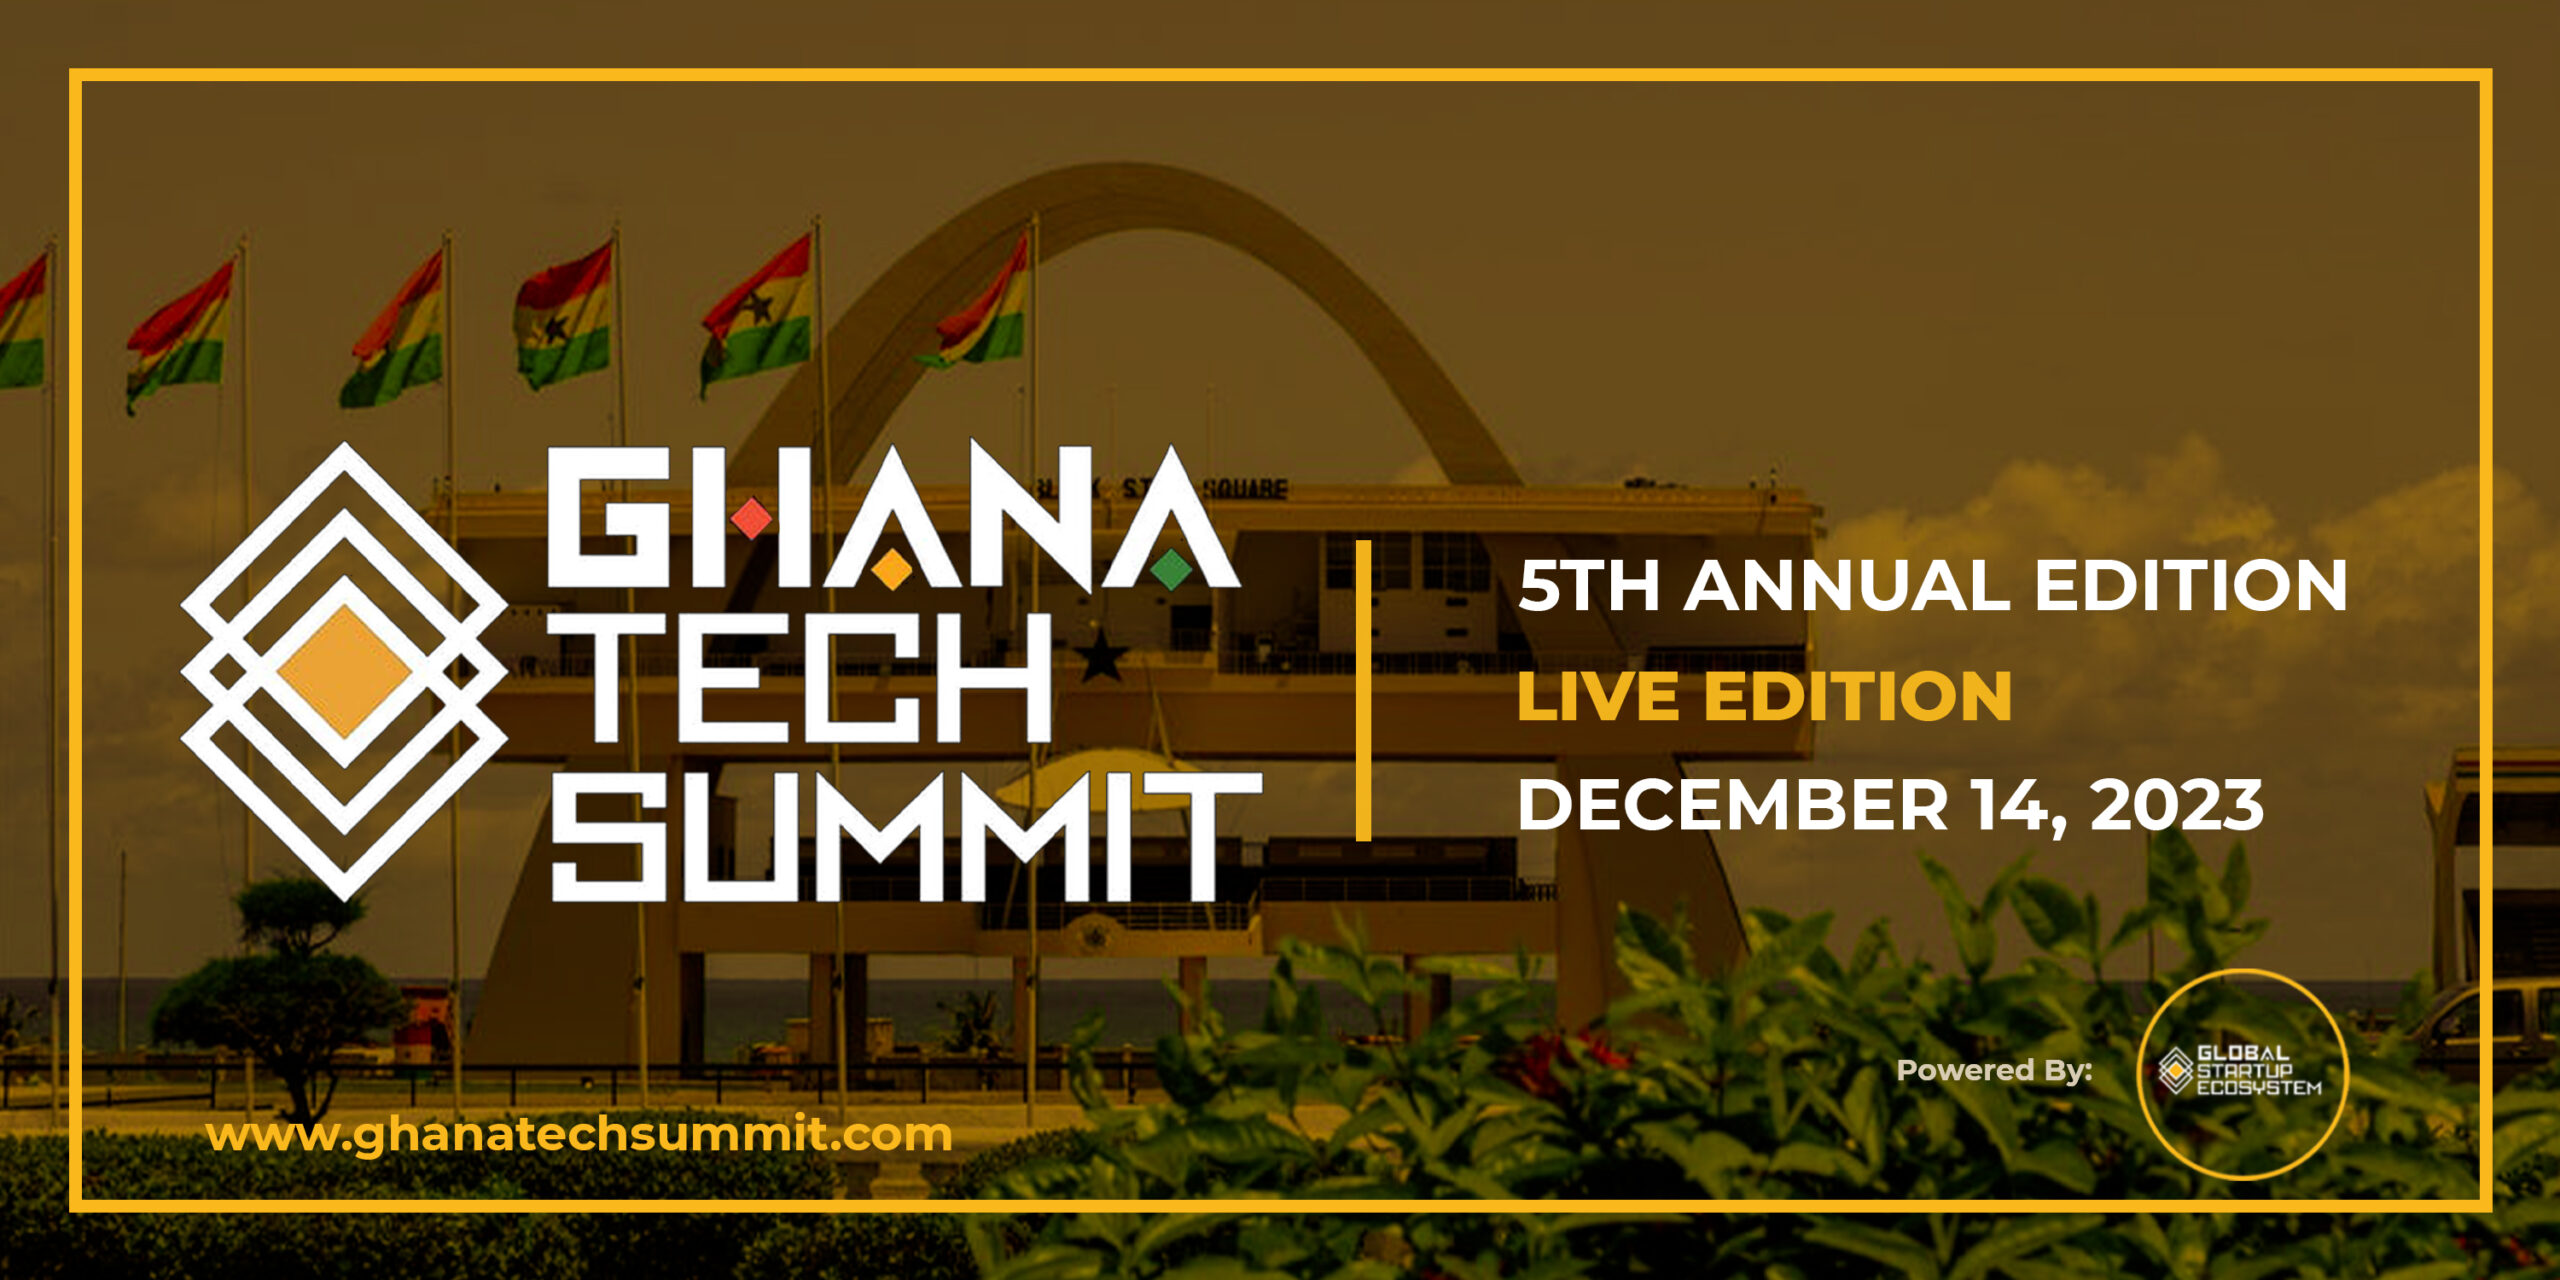 Next 5th Edition of Ghana Tech Summit to Be Announced Soon!